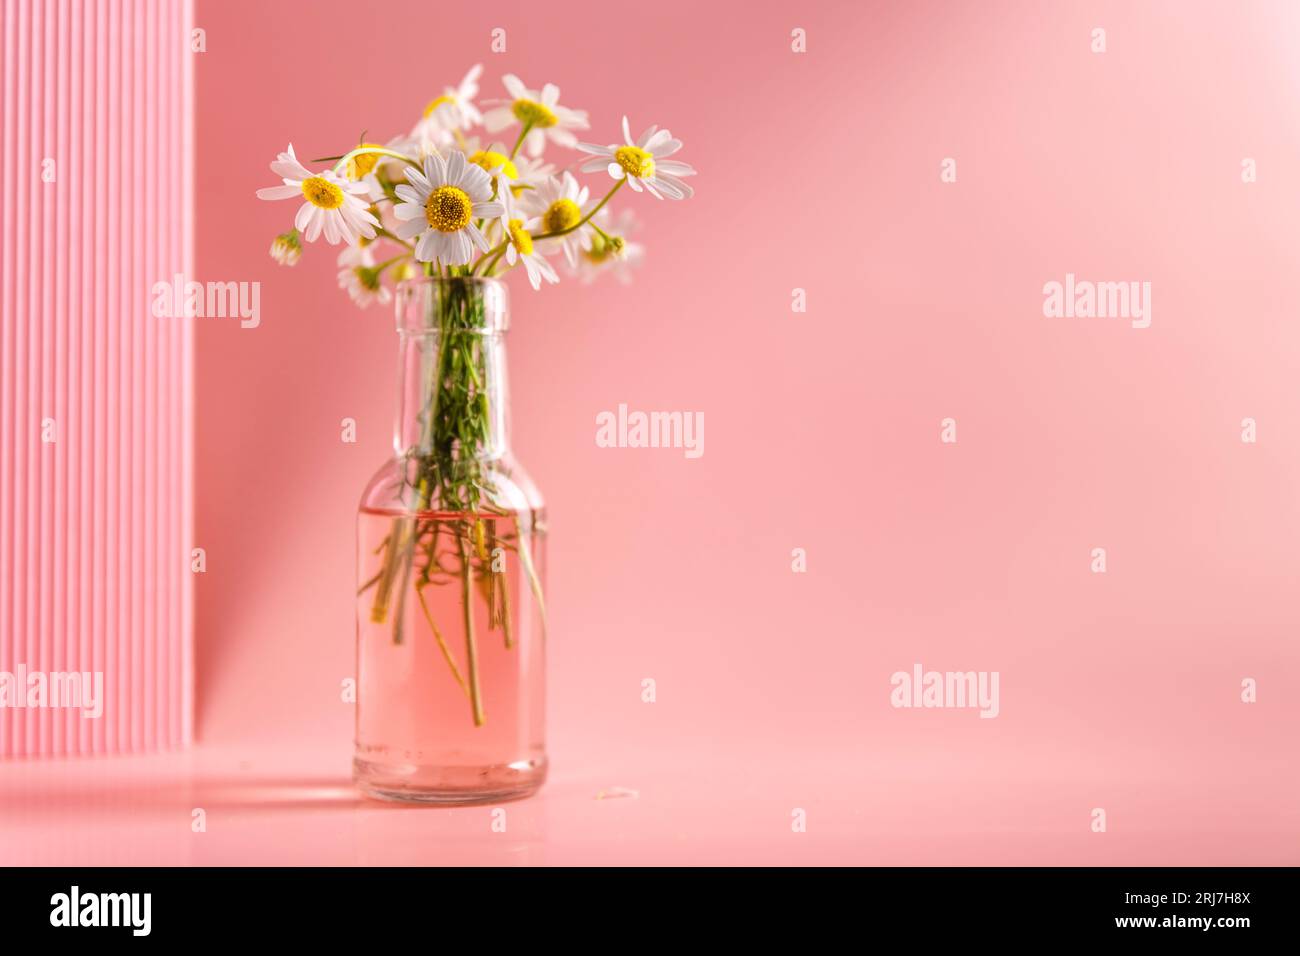 Delicate daisies in a vase on a pink background. barbie pink, aith copy space Stock Photo